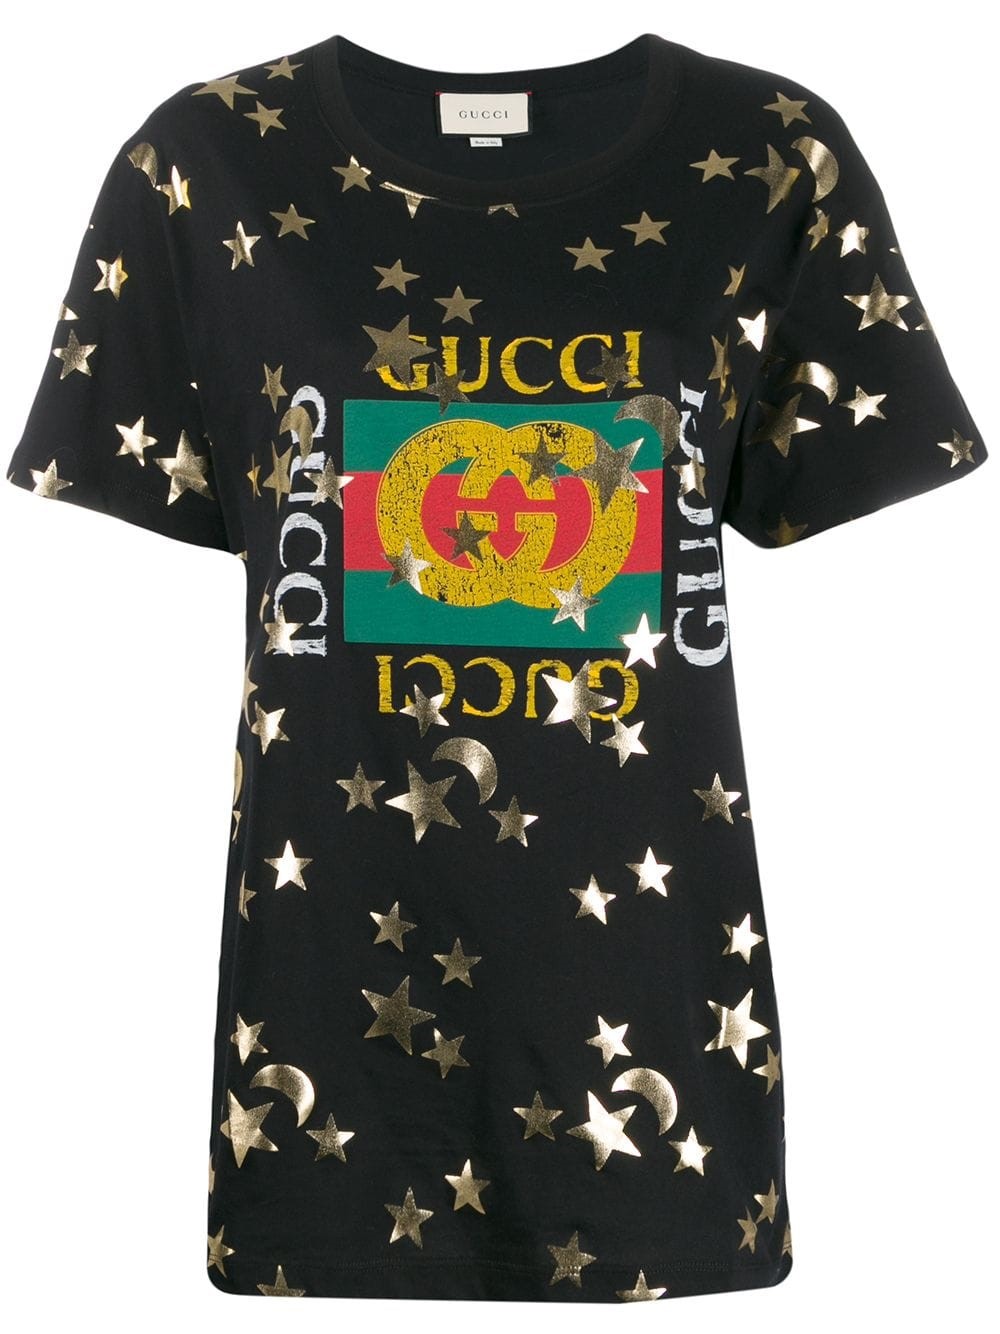 gucci STAR PRINT T-SHIRT available on montiboutique.com - 30346